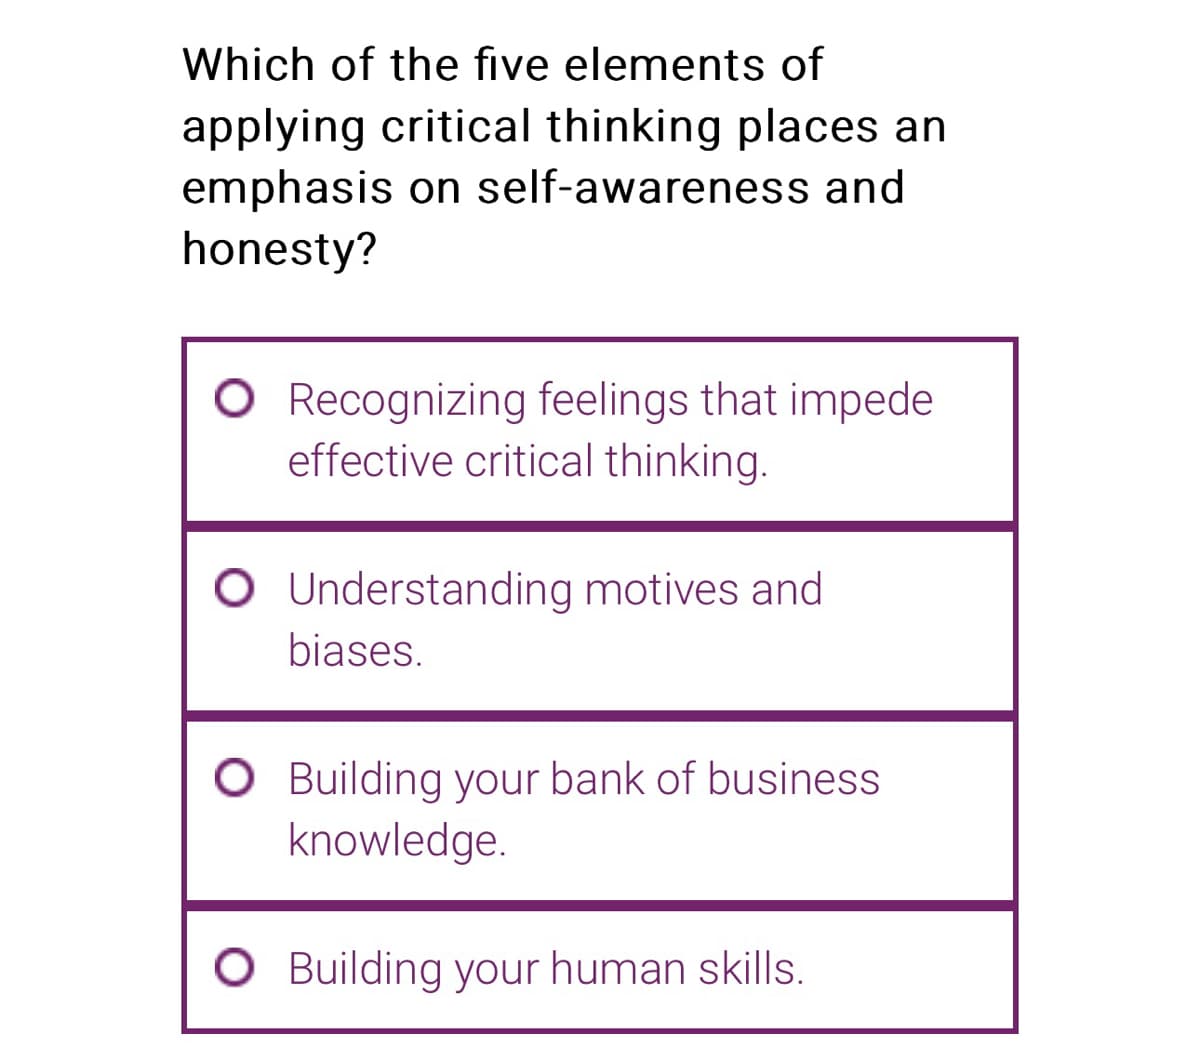 Which of the five elements of
applying critical thinking places an
emphasis on self-awareness and
honesty?
O Recognizing feelings that impede
effective critical thinking.
O Understanding motives and
biases.
O Building your bank of business
knowledge.
Building your human skills.